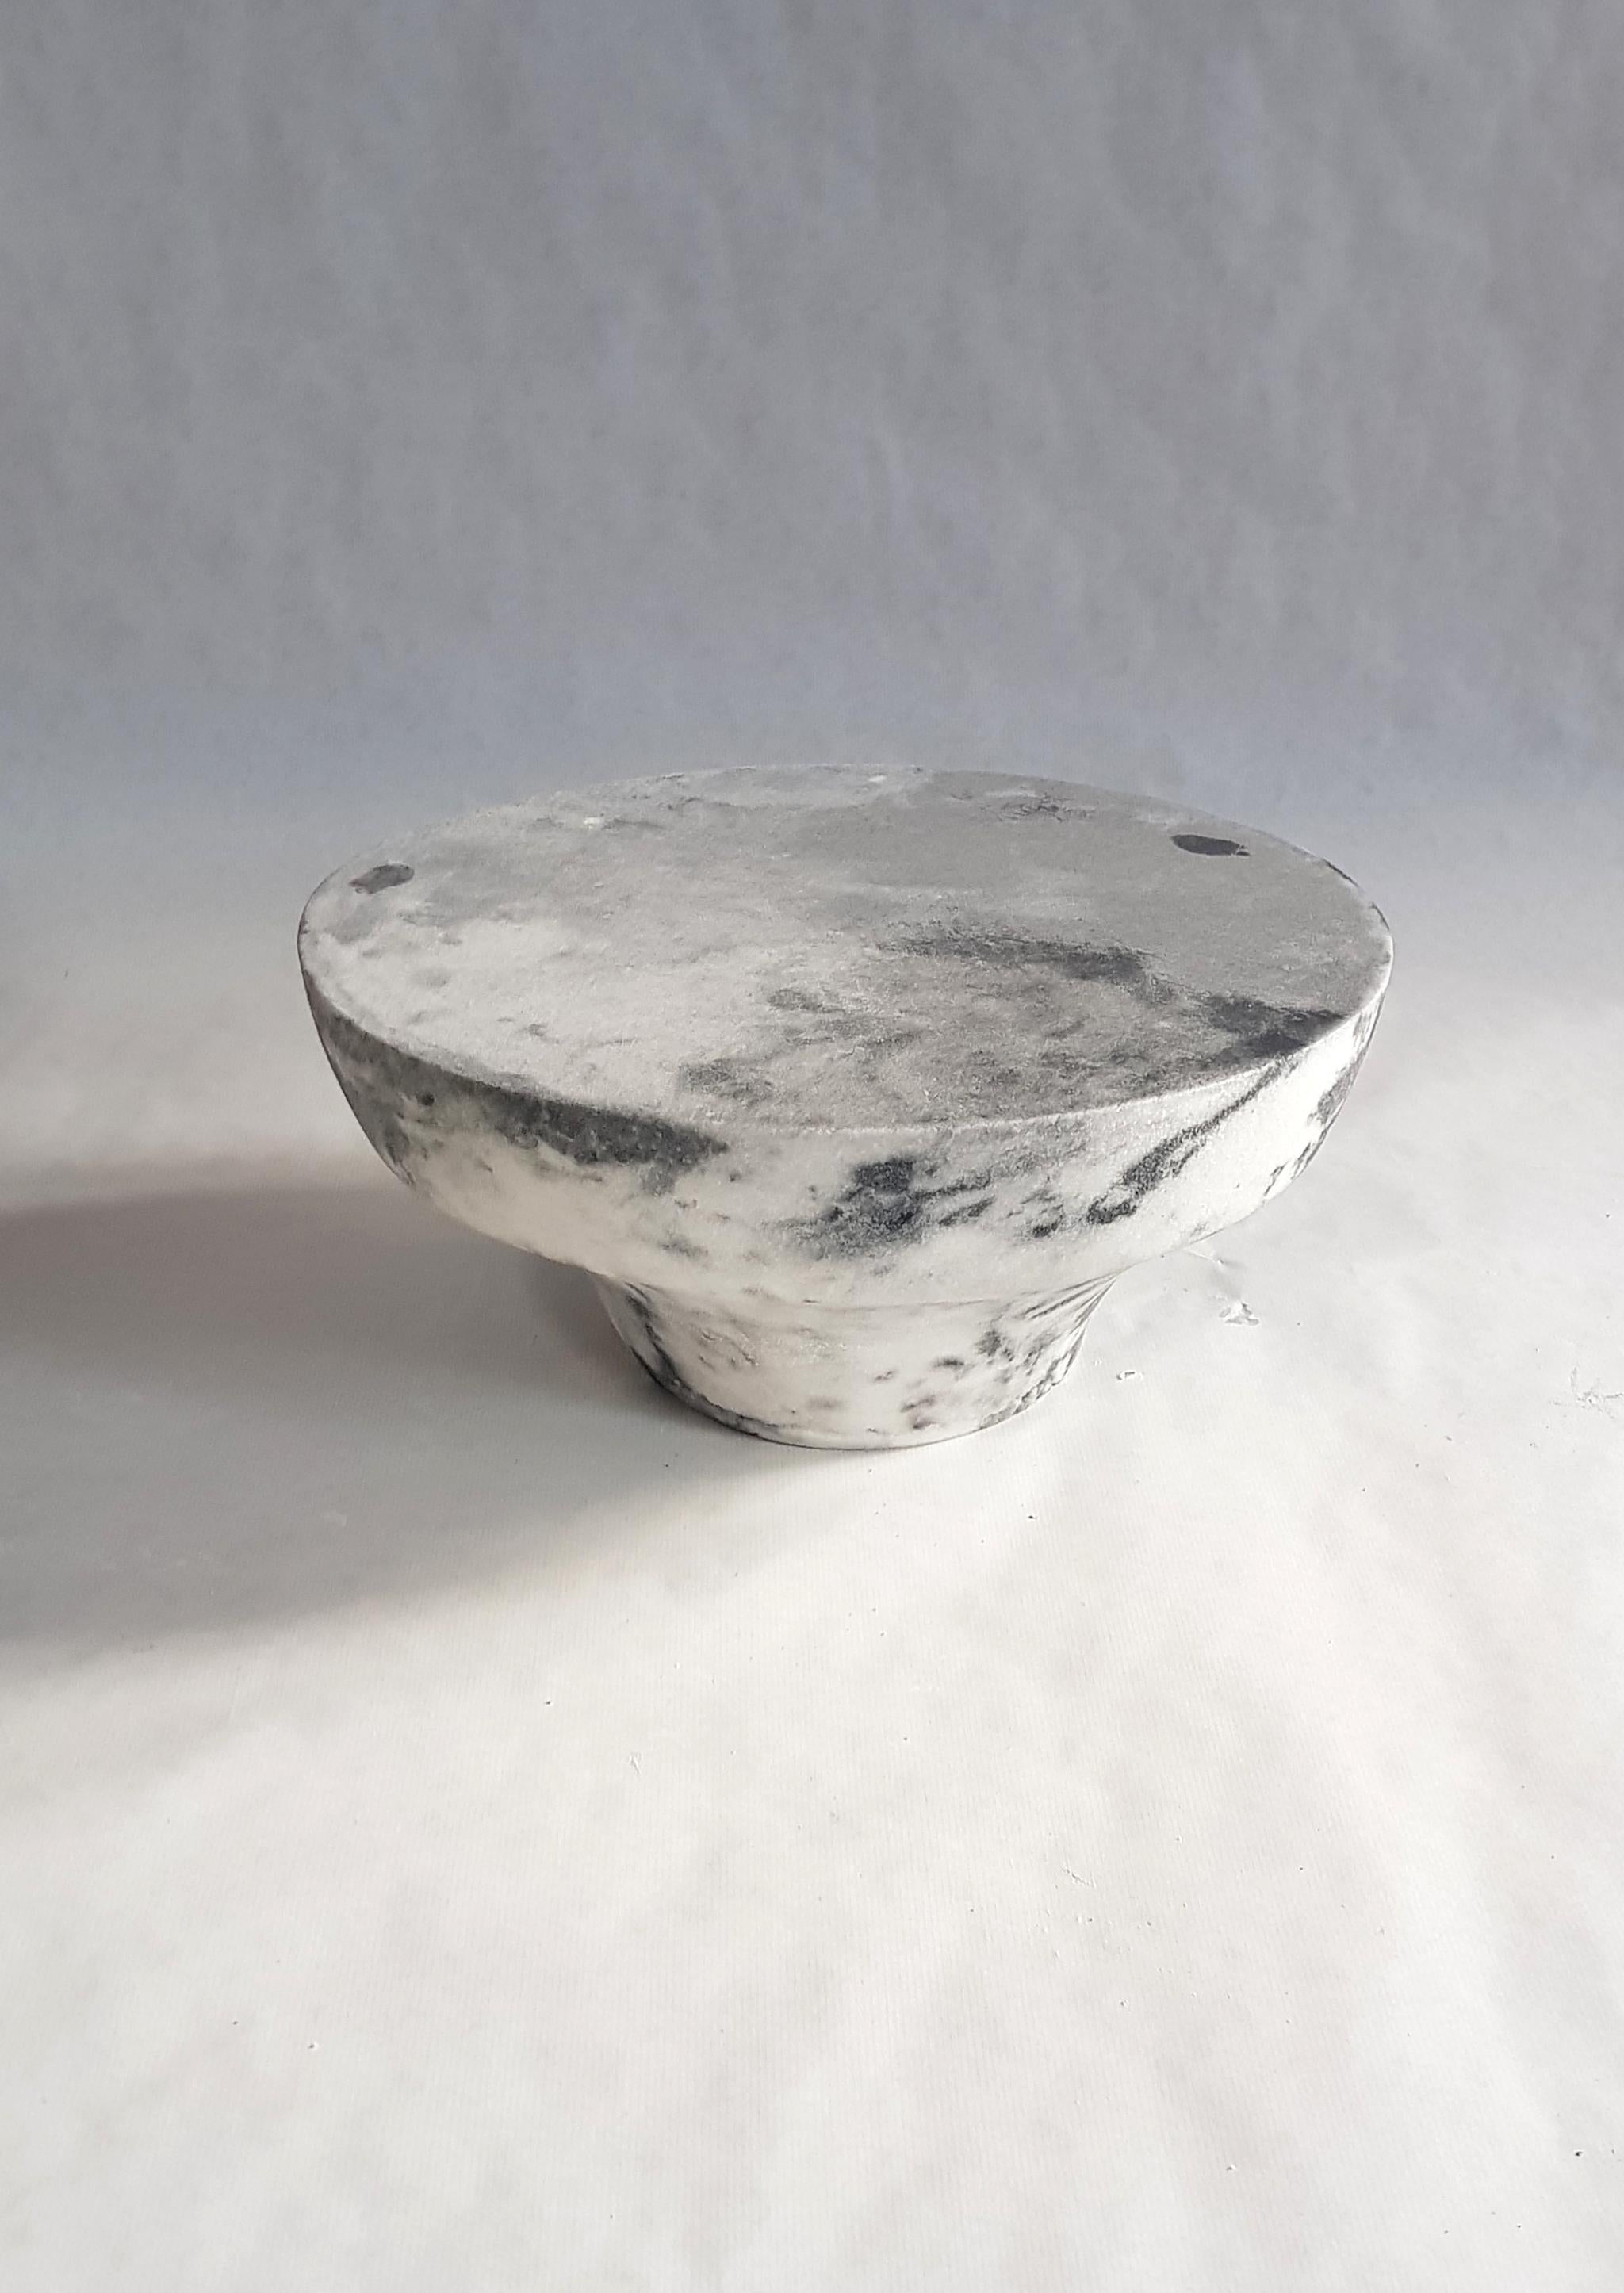 Marble salt meditation stool by Roxane Lahidji
Material: Marbled salts
A unique award winning technique developed by Roxane Lahidji
Dimensions: 40 x 40 x 30 cm
Unique

Award winner of Bolia Design Awards 2019 and FD100 and present in the